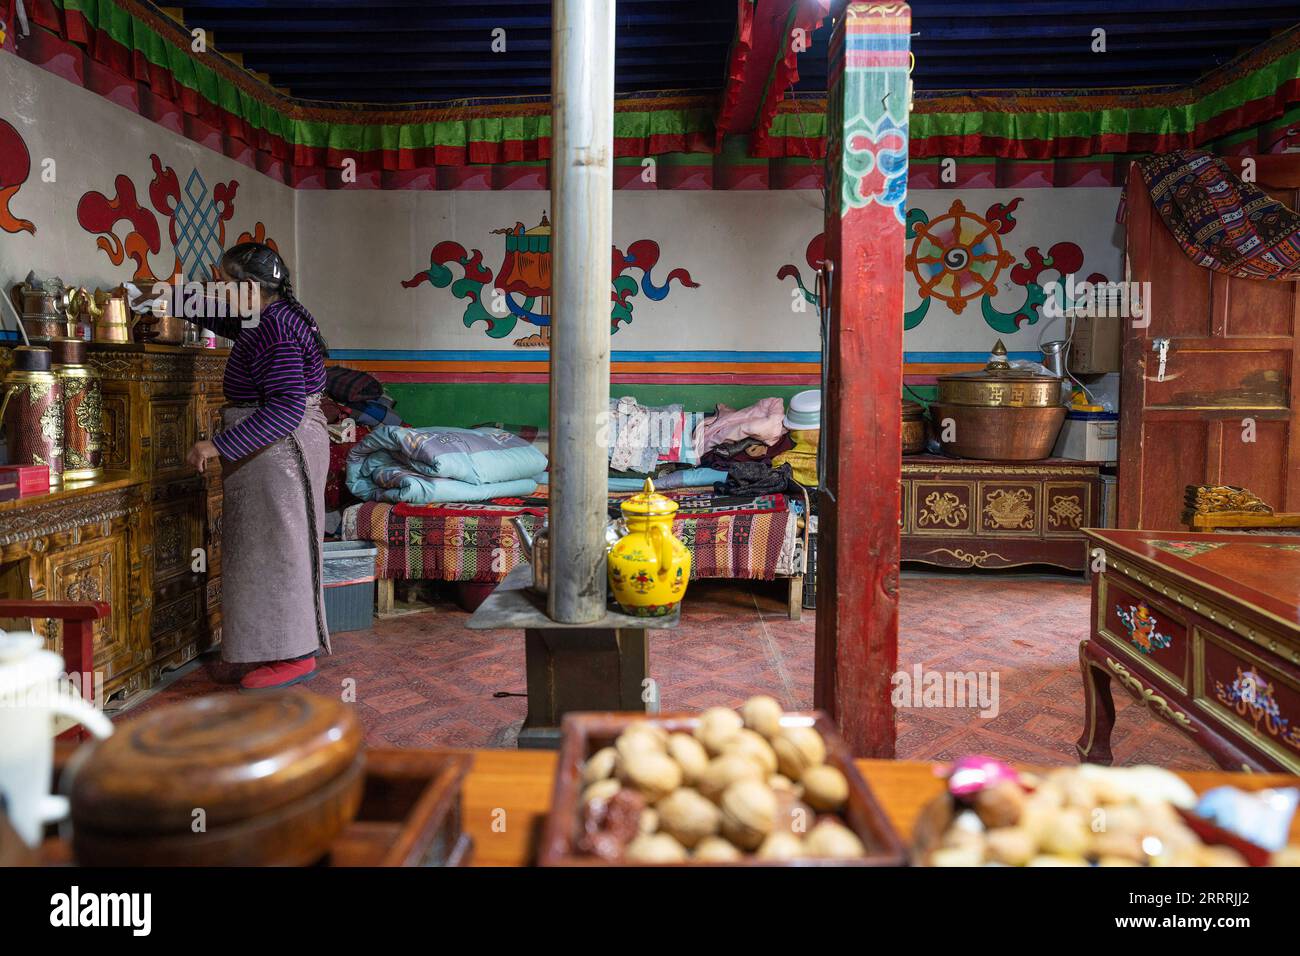 230531 -- NGARI, May 31, 2023 -- A relative in-law of Losang Zhamdu cleans the living room of her third-generation house in Demqog Village, Zhaxigang Township, Gar County in Ngari Prefecture of southwest China s Tibet Autonomous Region, May 28, 2023. Sitting in the sun outside his residence in Demqog Village, Zhaxigang Township, Gar County in Ngari Prefecture of Tibet, 84-year-old Losang Zhamdu told a story of the five homes he had lived in. My mother and I lived together in a tent made with yak hair, all our possessions were a goat fur jacket and a worn-out Tibetan blanket, recalled Losang Zh Stock Photo